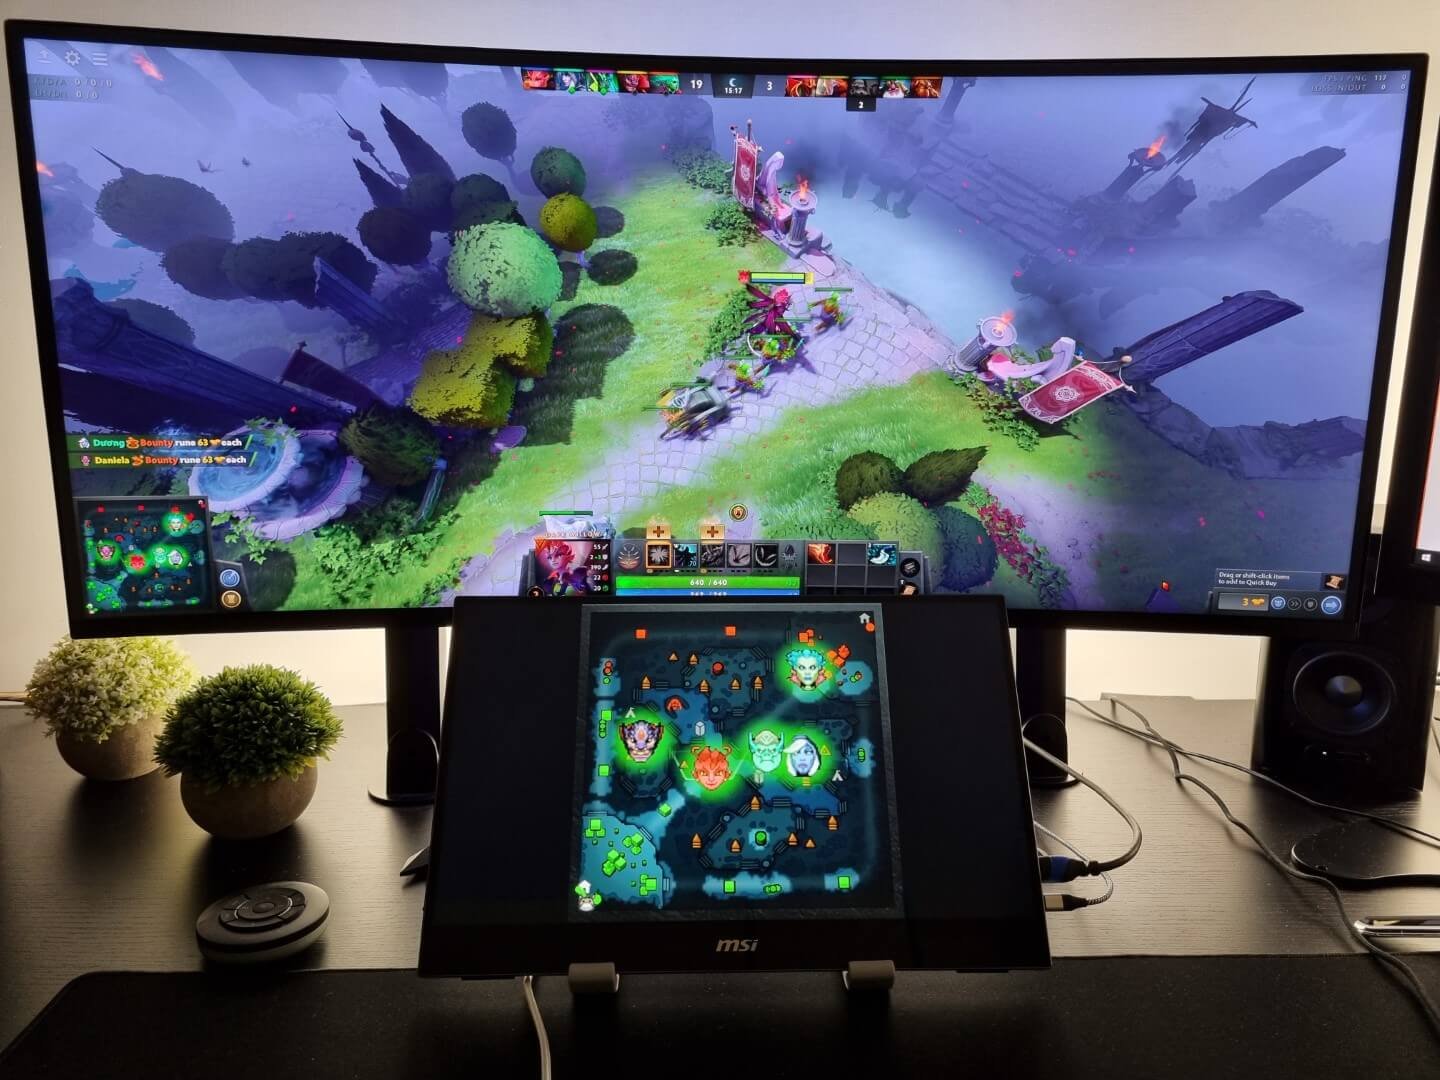 How to move a fullscreen game to the second monitor - Quora